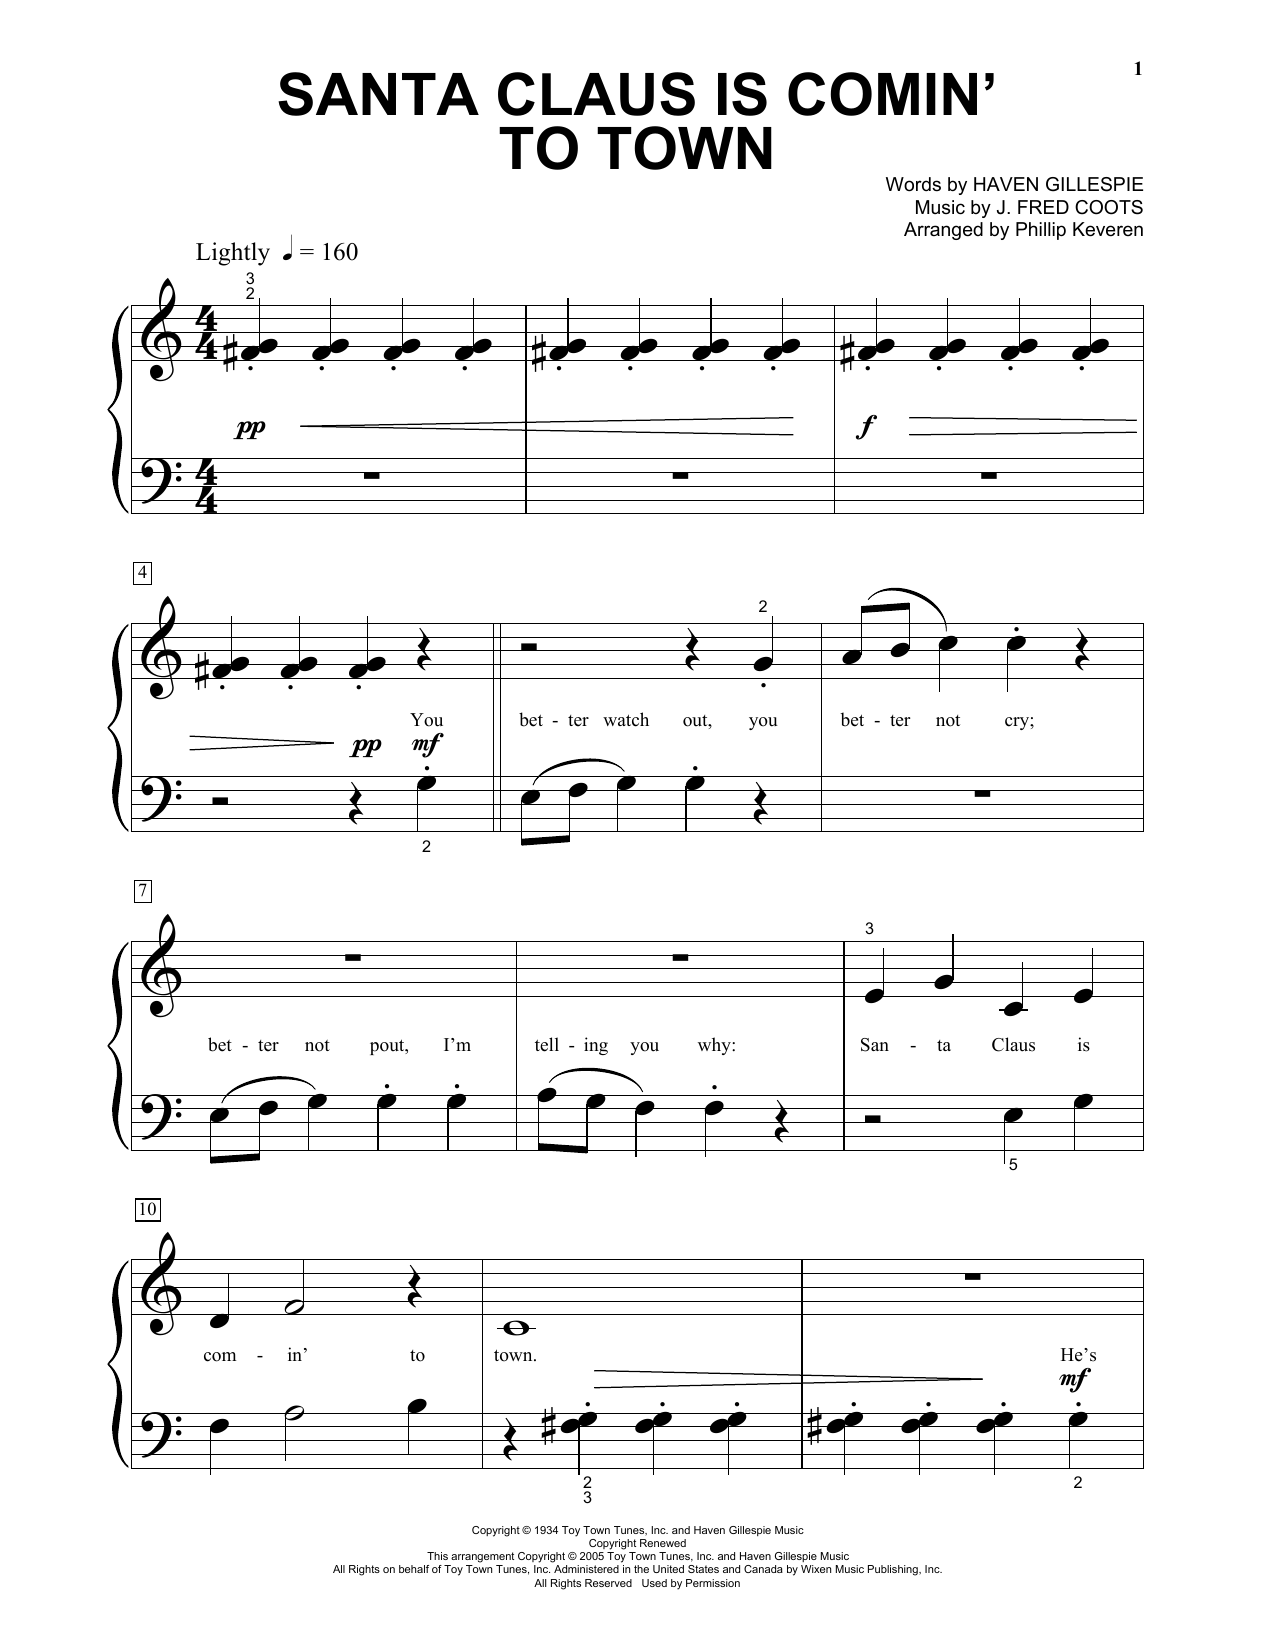 Download J. Fred Coots Santa Claus Is Comin' To Town Sheet Music